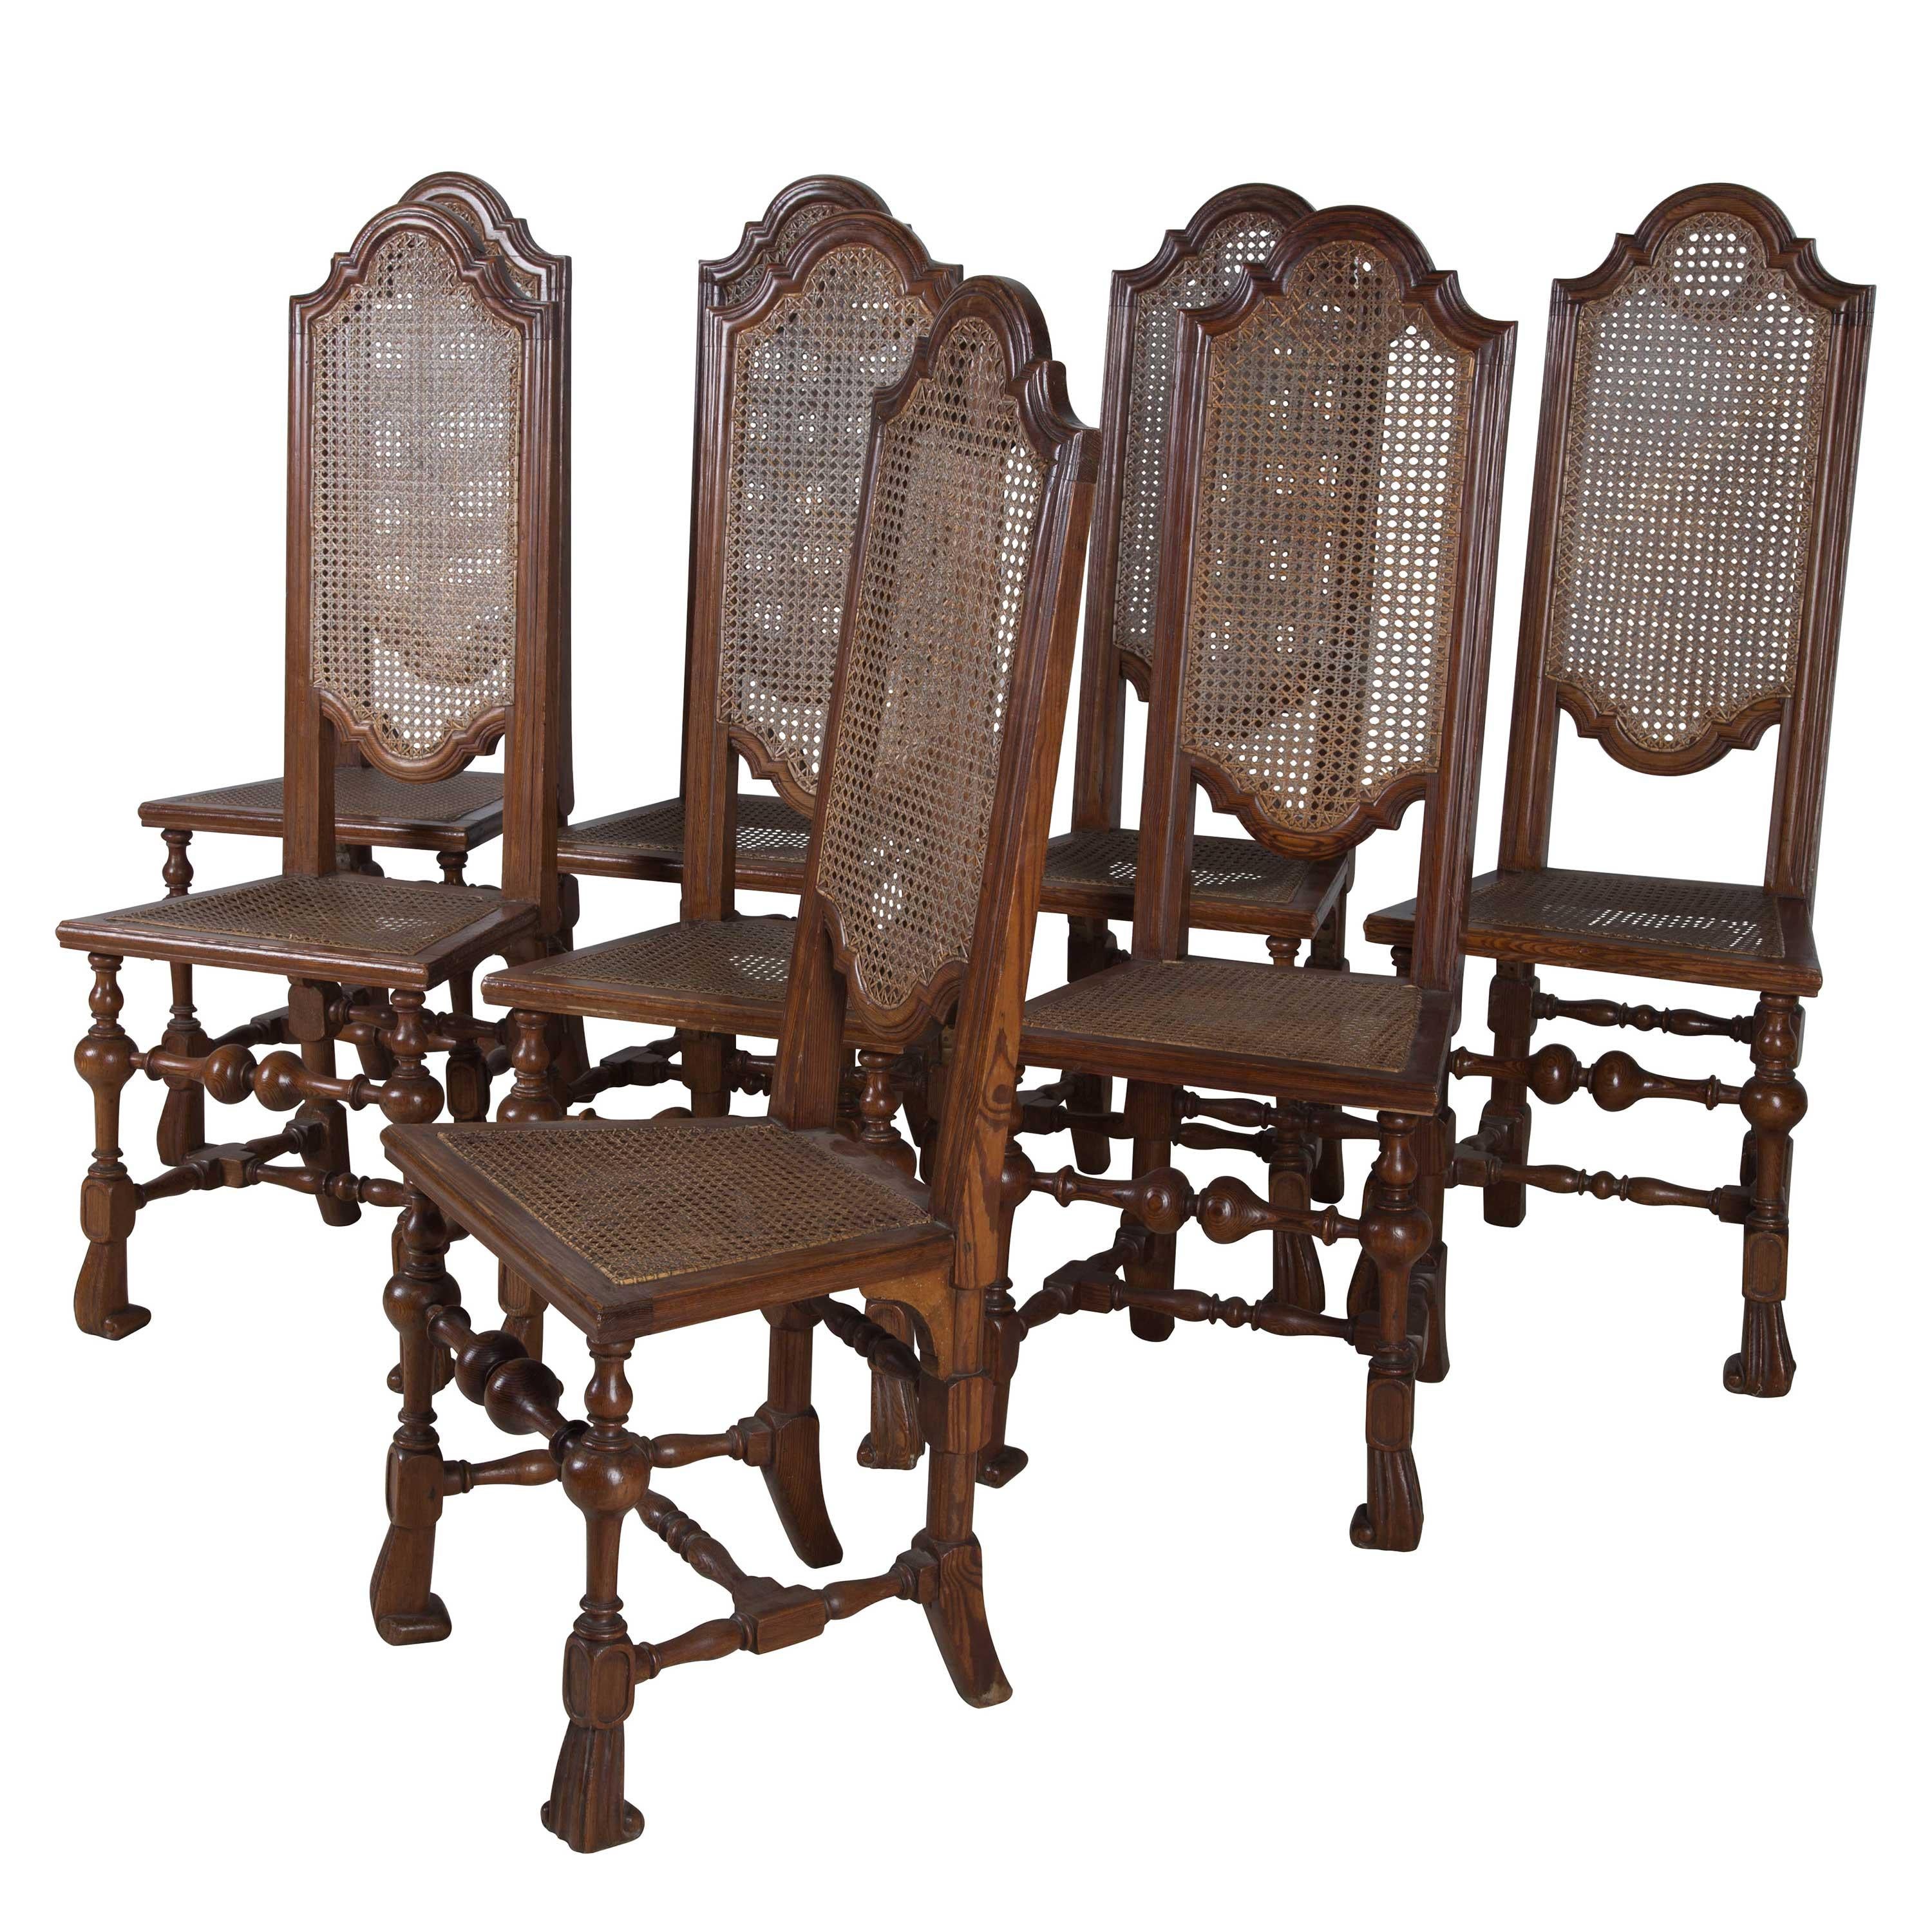 Two sets of eight pine 19th century dining chairs with cane seats. Priced per set of eight.